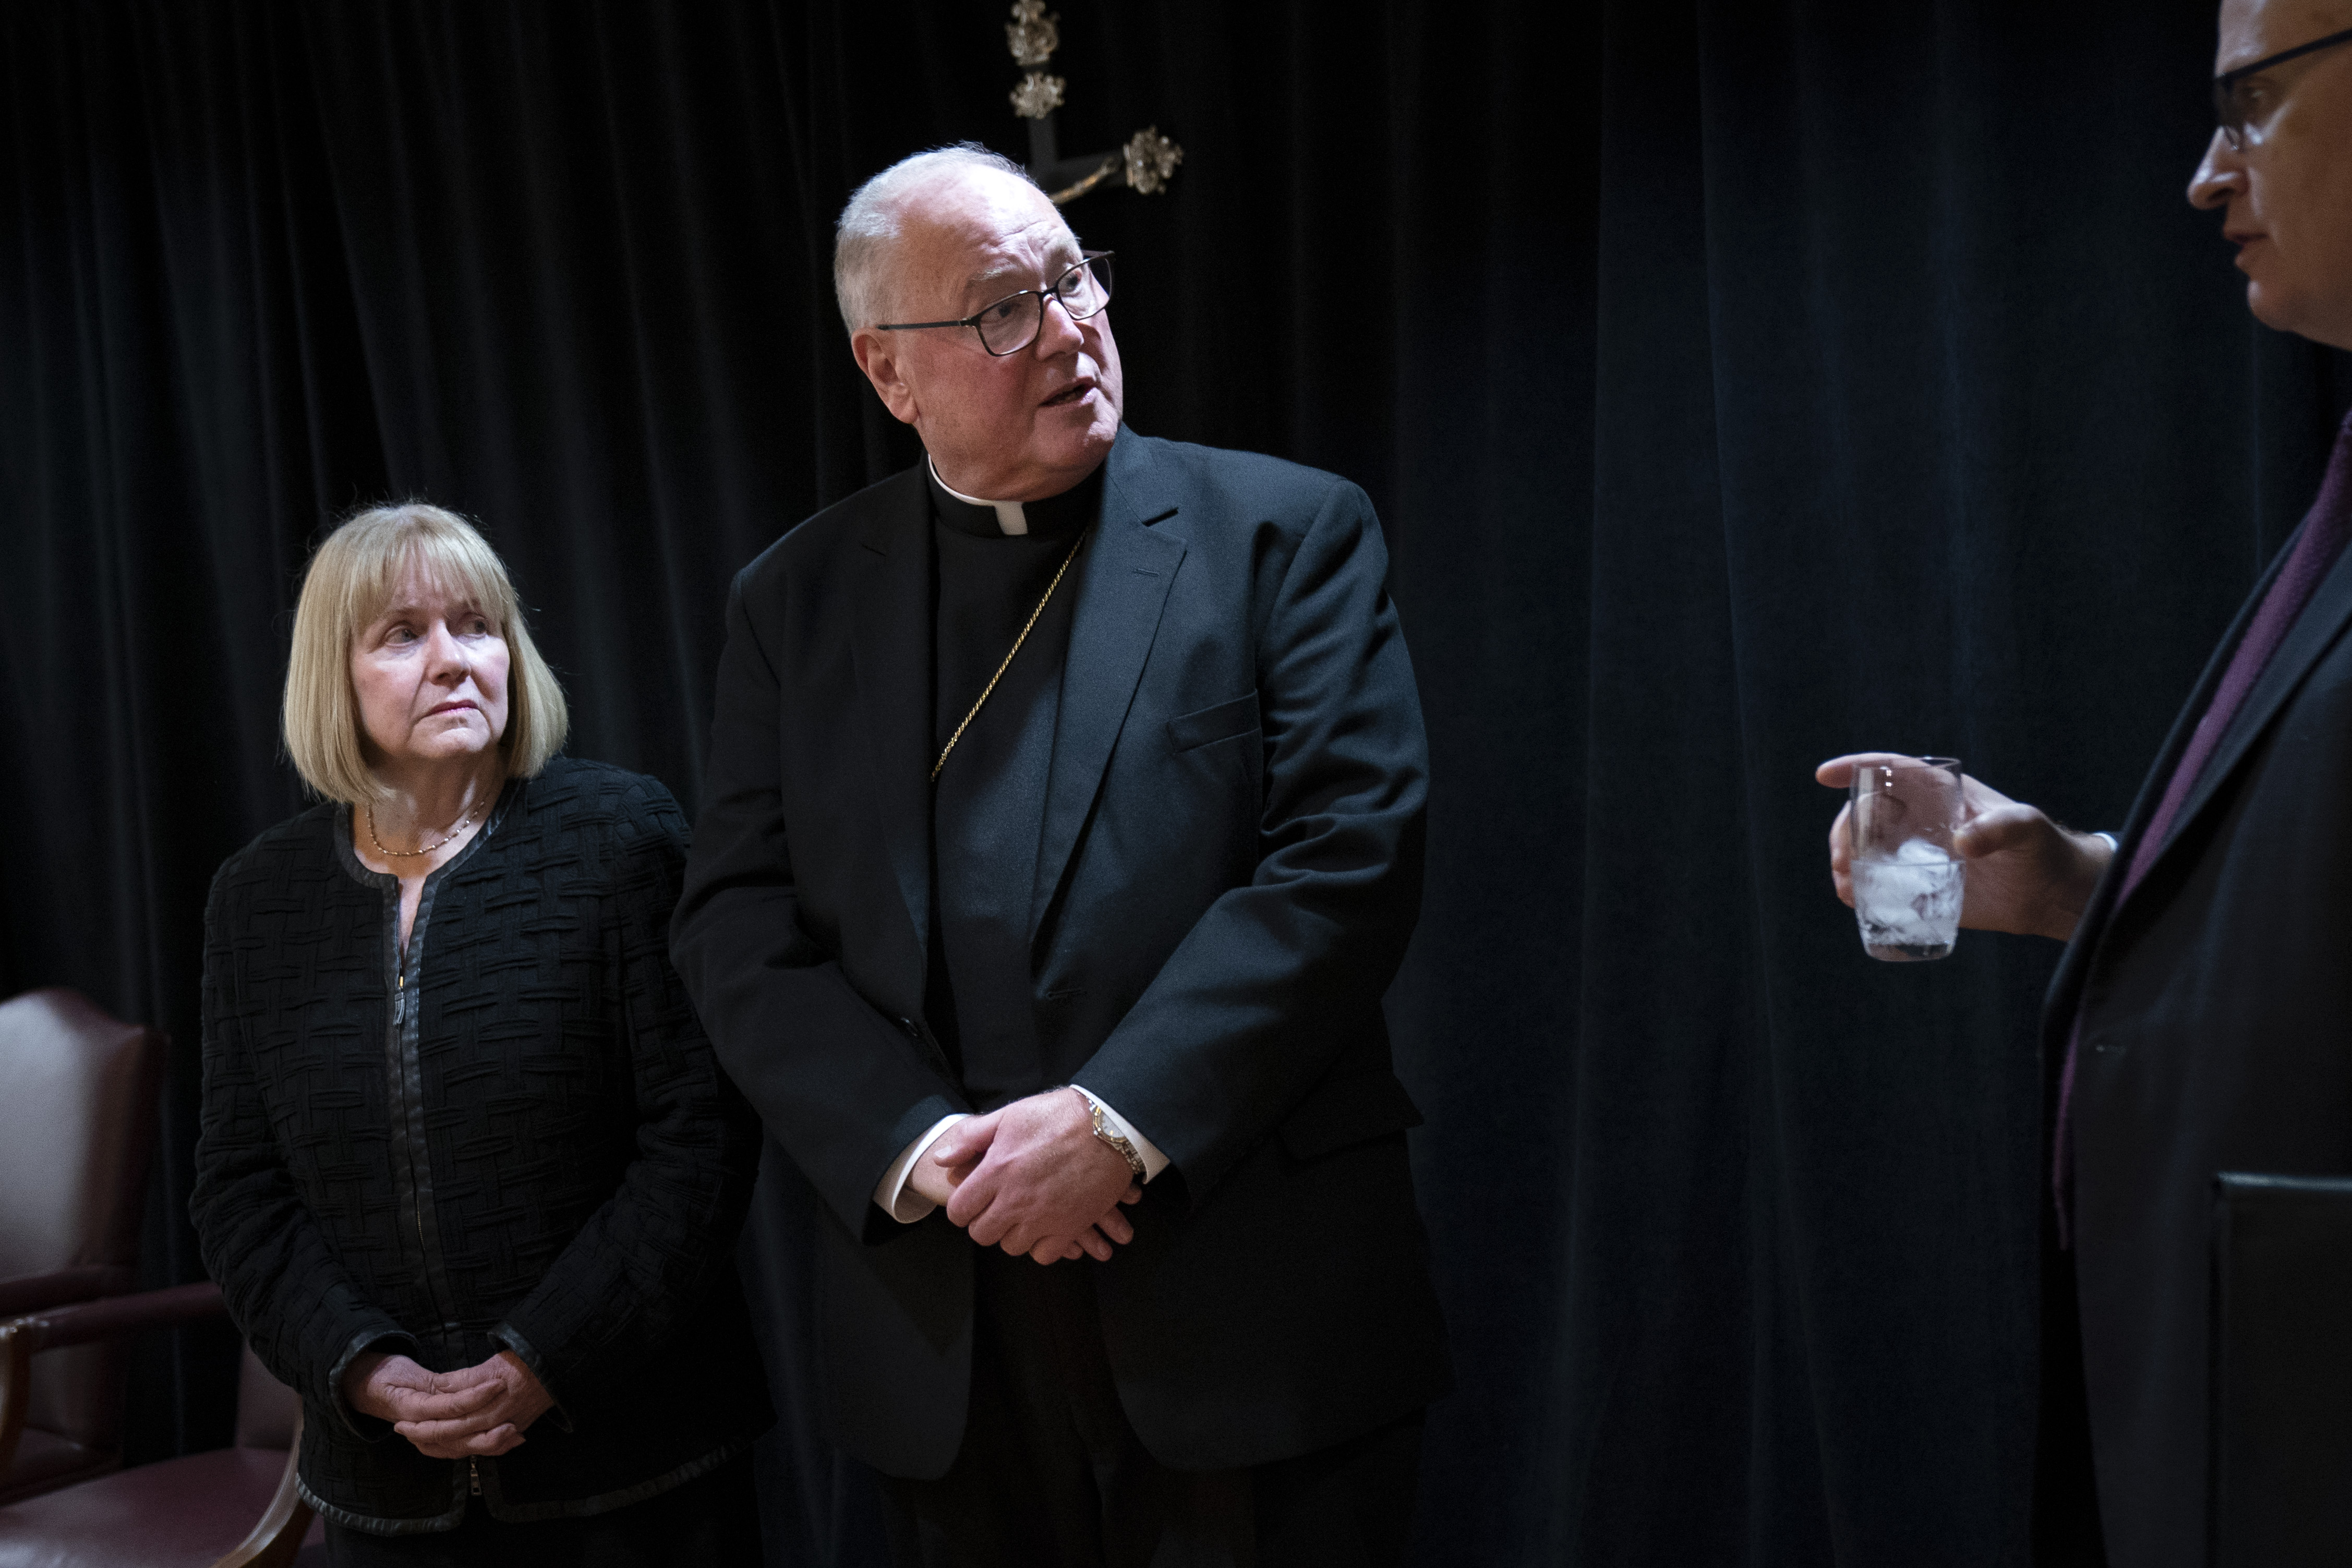 NEW YORK, NY - SEPTEMBER 20: (L-R) Former federal judge Barbara Jones speaks as Cardinal Timothy Dolan, archbishop of New York, prepares to exit following a news conference at the headquarters of the Archdiocese of New York, September 20, 2018 in New York City. Dolan announced that he is appointing Jones, a former judge for the U.S. District Court in the Southern District of New York, to review the Church's procedures and protocols for handling allegations of sexual abuse. (Photo by Drew Angerer/Getty Images)